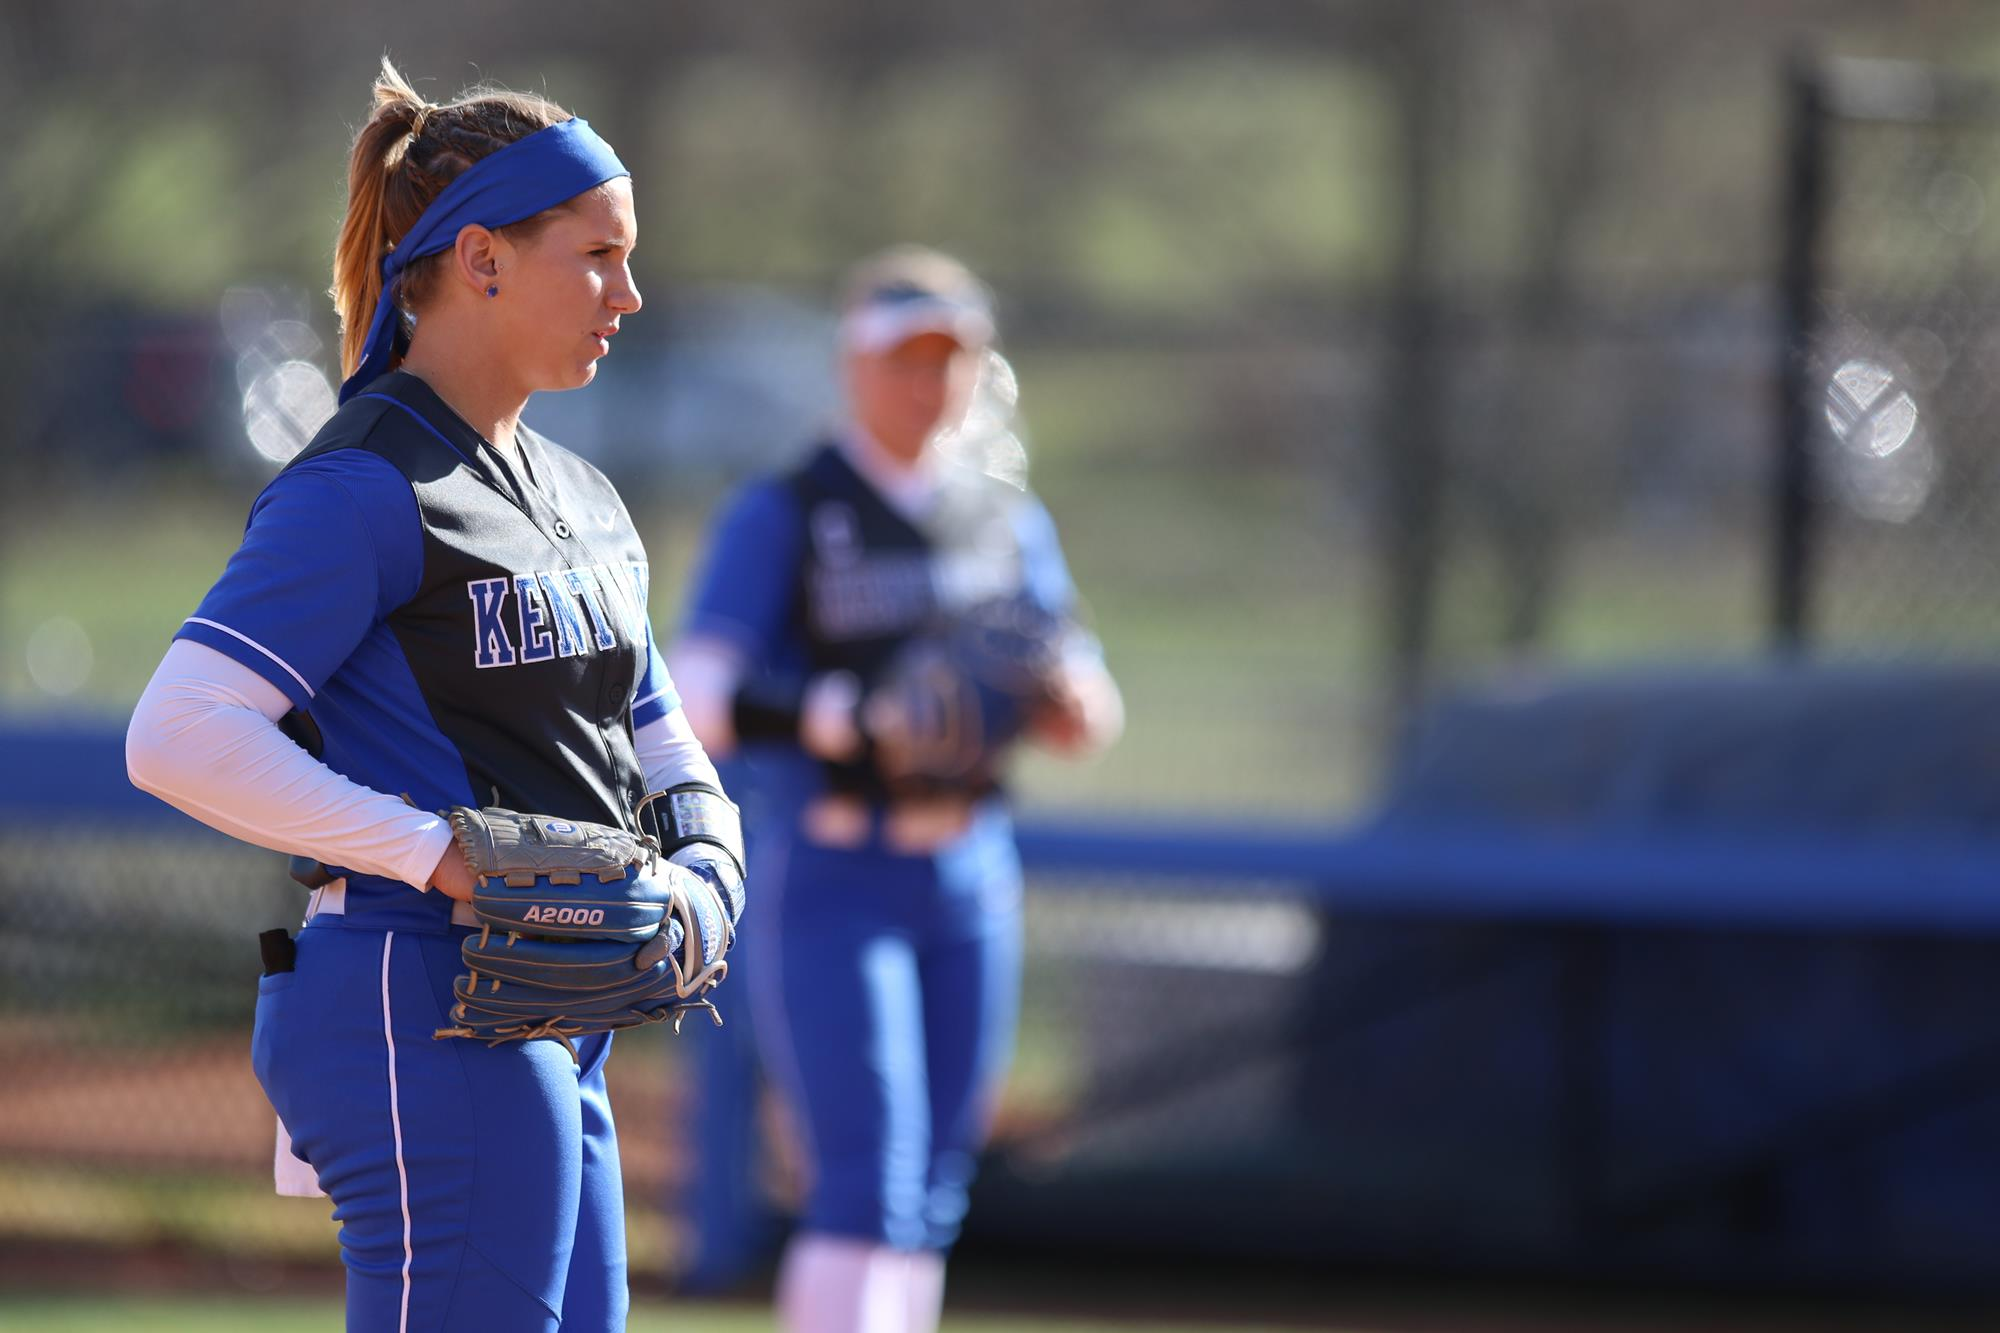 Cheek’s Triples, Humes’ Strong Outing Gives UK Home Opener Win